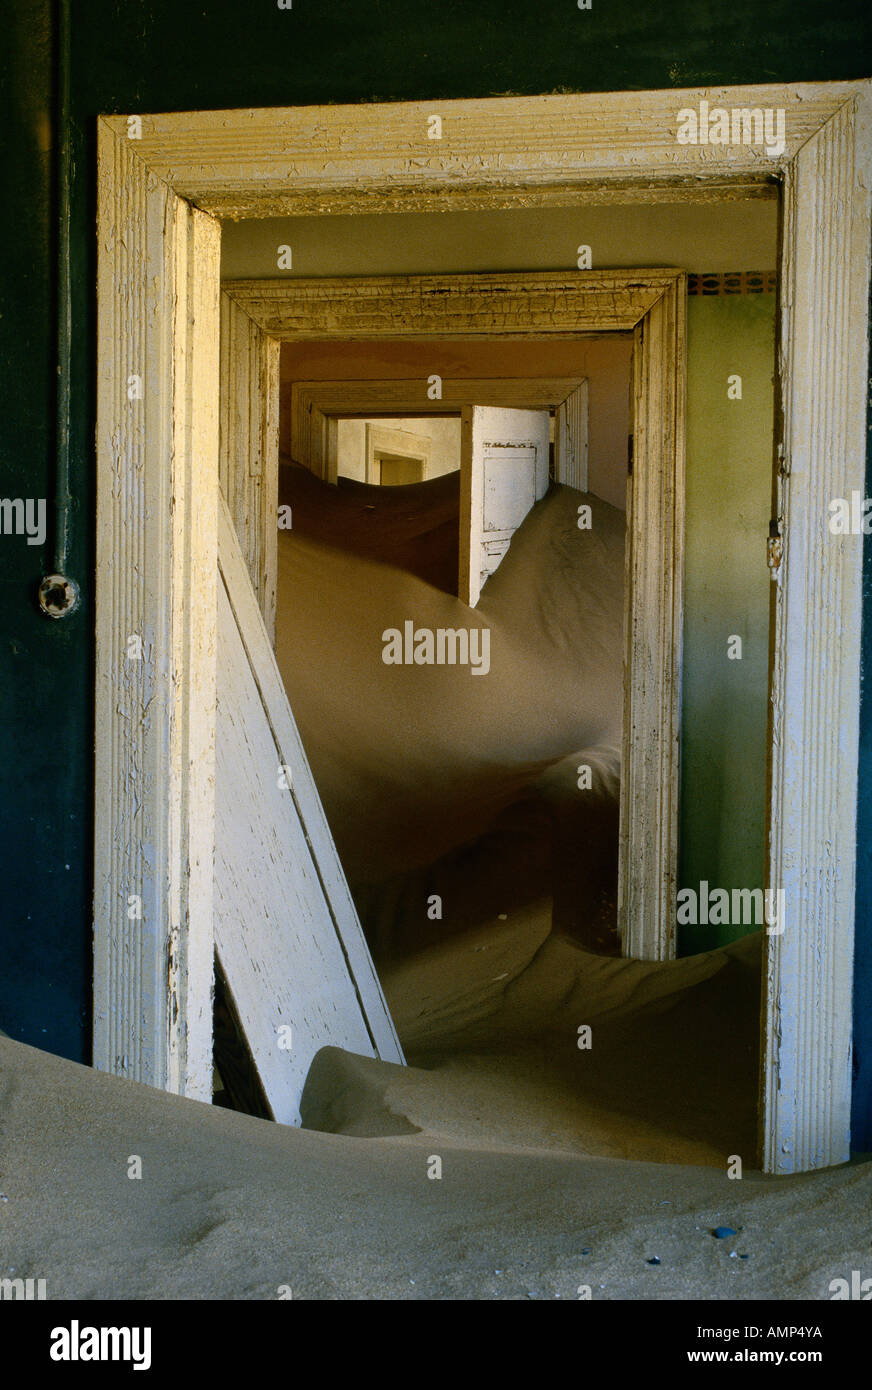 Interior of Abandoned Building, Kolmanskop Ghost Town, Namibia Stock Photo